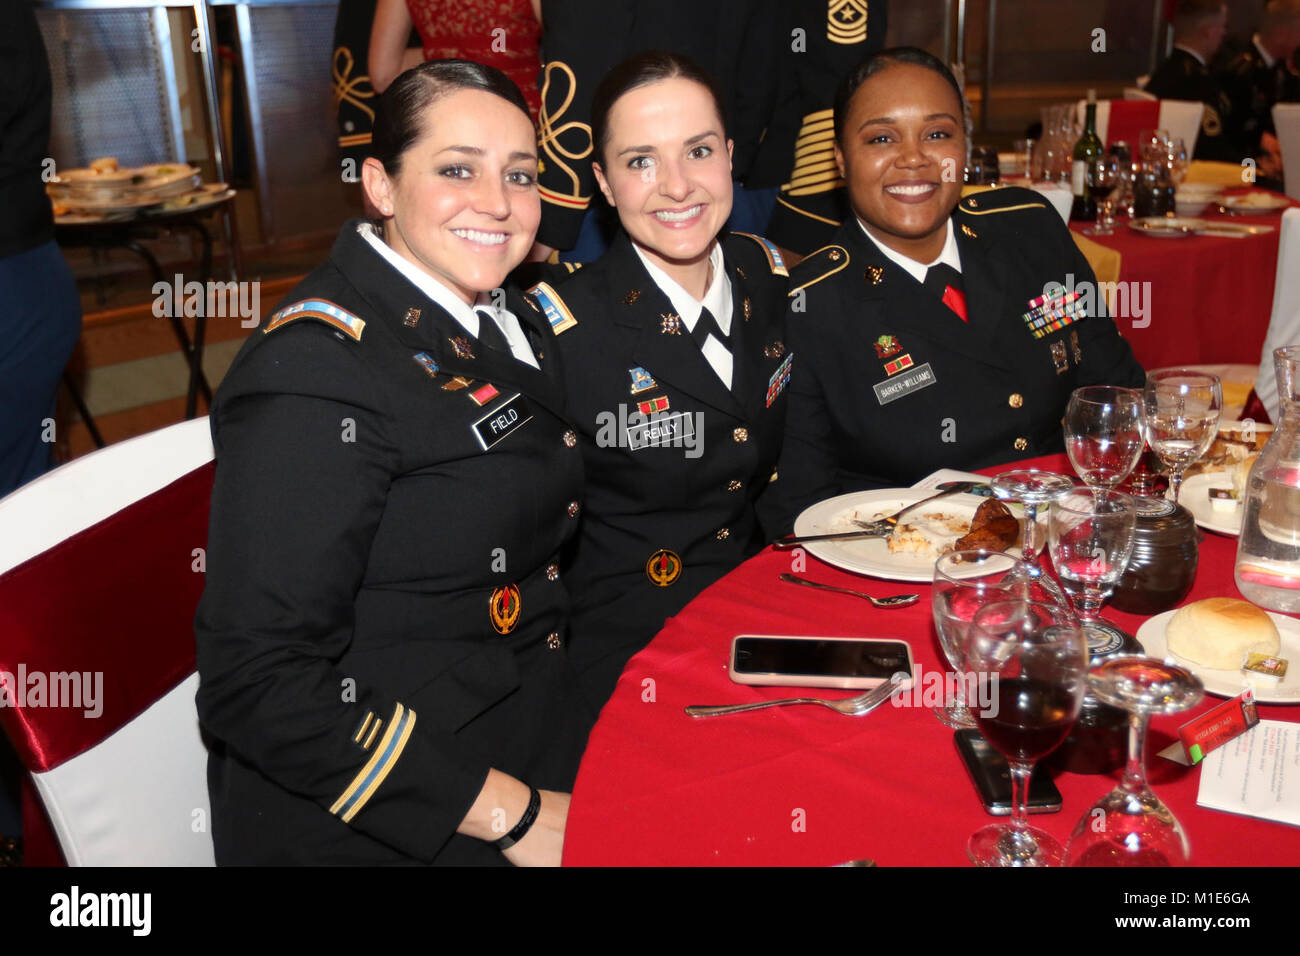 From left to right Capt. Carly A. Field, Headquarters and Headquarters Battery, 35th Air Defense Artillery Brigade, assistant officer in charge of the Saint Barbara’s Ball, Capt. Paulina D. Reilly, HHB, 35th ADA Brigade S2 assistant and Master Sgt. Latrice R. Barker-Williams, HHB, 35th ADA Brigade S2 noncommissioned officer in charge, smile for a quick Stock Photo